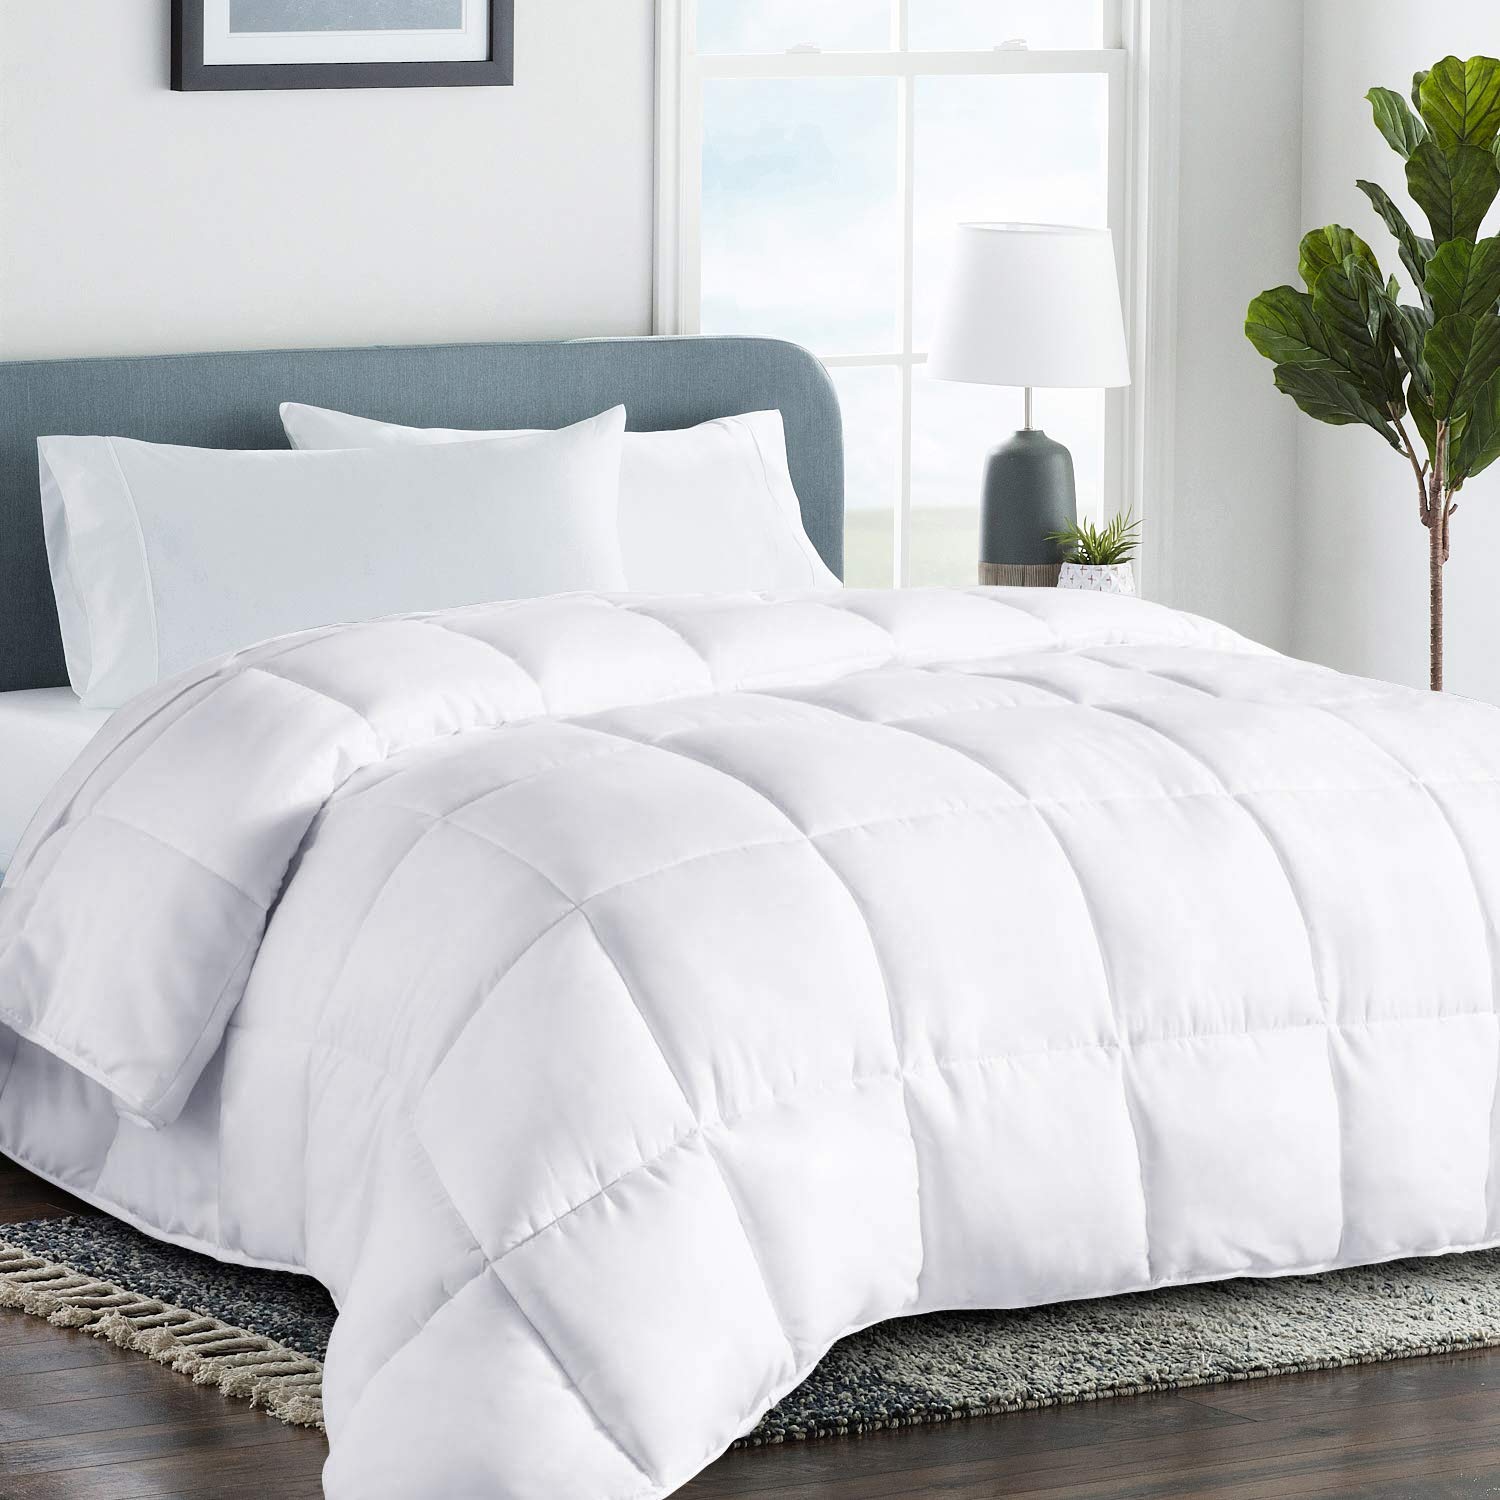 Book Cover COHOME King 2100 Series Cooling Comforter Down Alternative Quilted Duvet Insert with Corner Tabs All-Season - Winter Warm Luxury Hotel Comforter - Reversible - Machine Washable - White